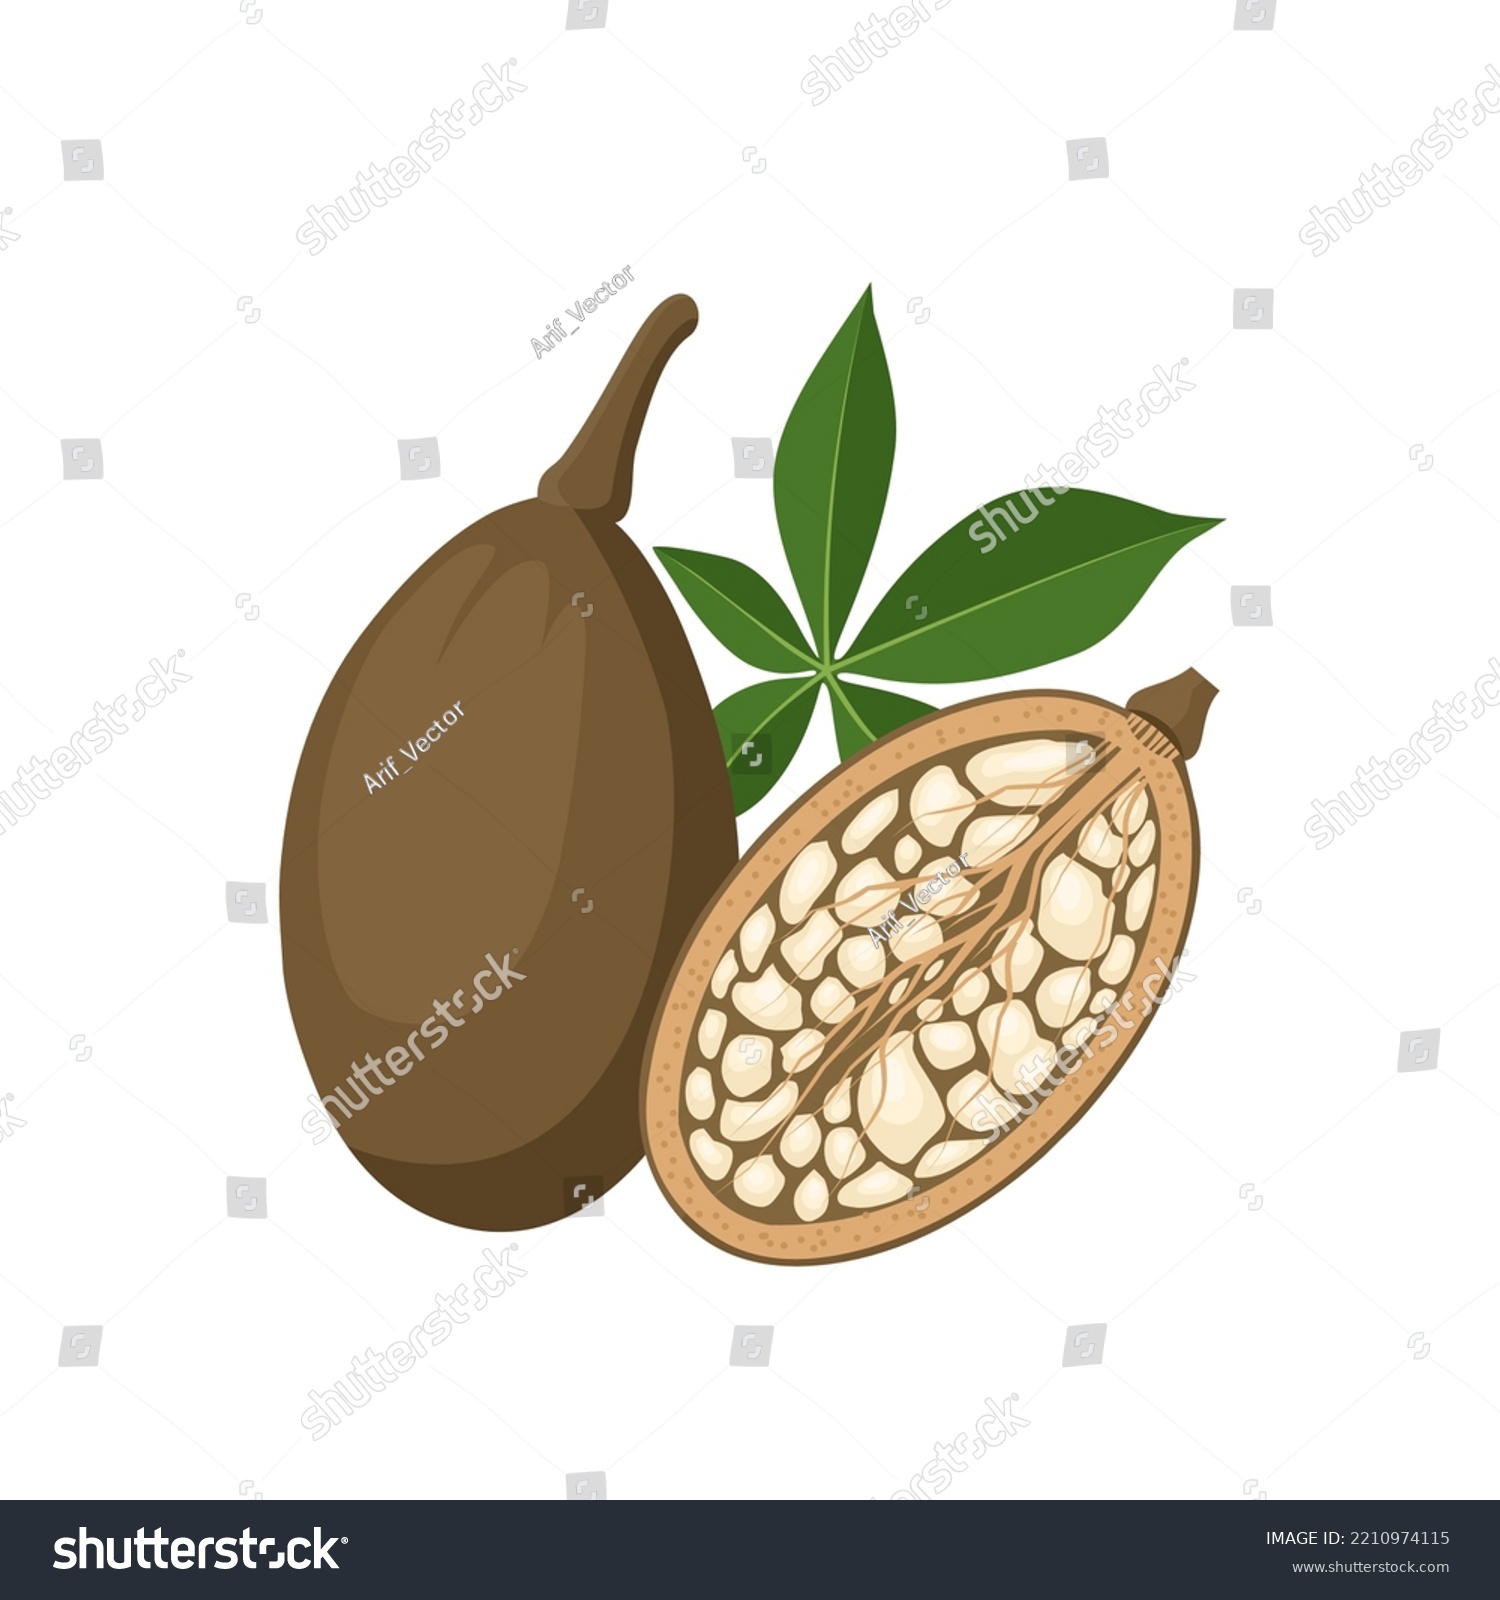 SVG of Vector illustration, whole and halved baobab fruit, scientific name Adansonia digitata, with green leaves, isolated on white background. svg